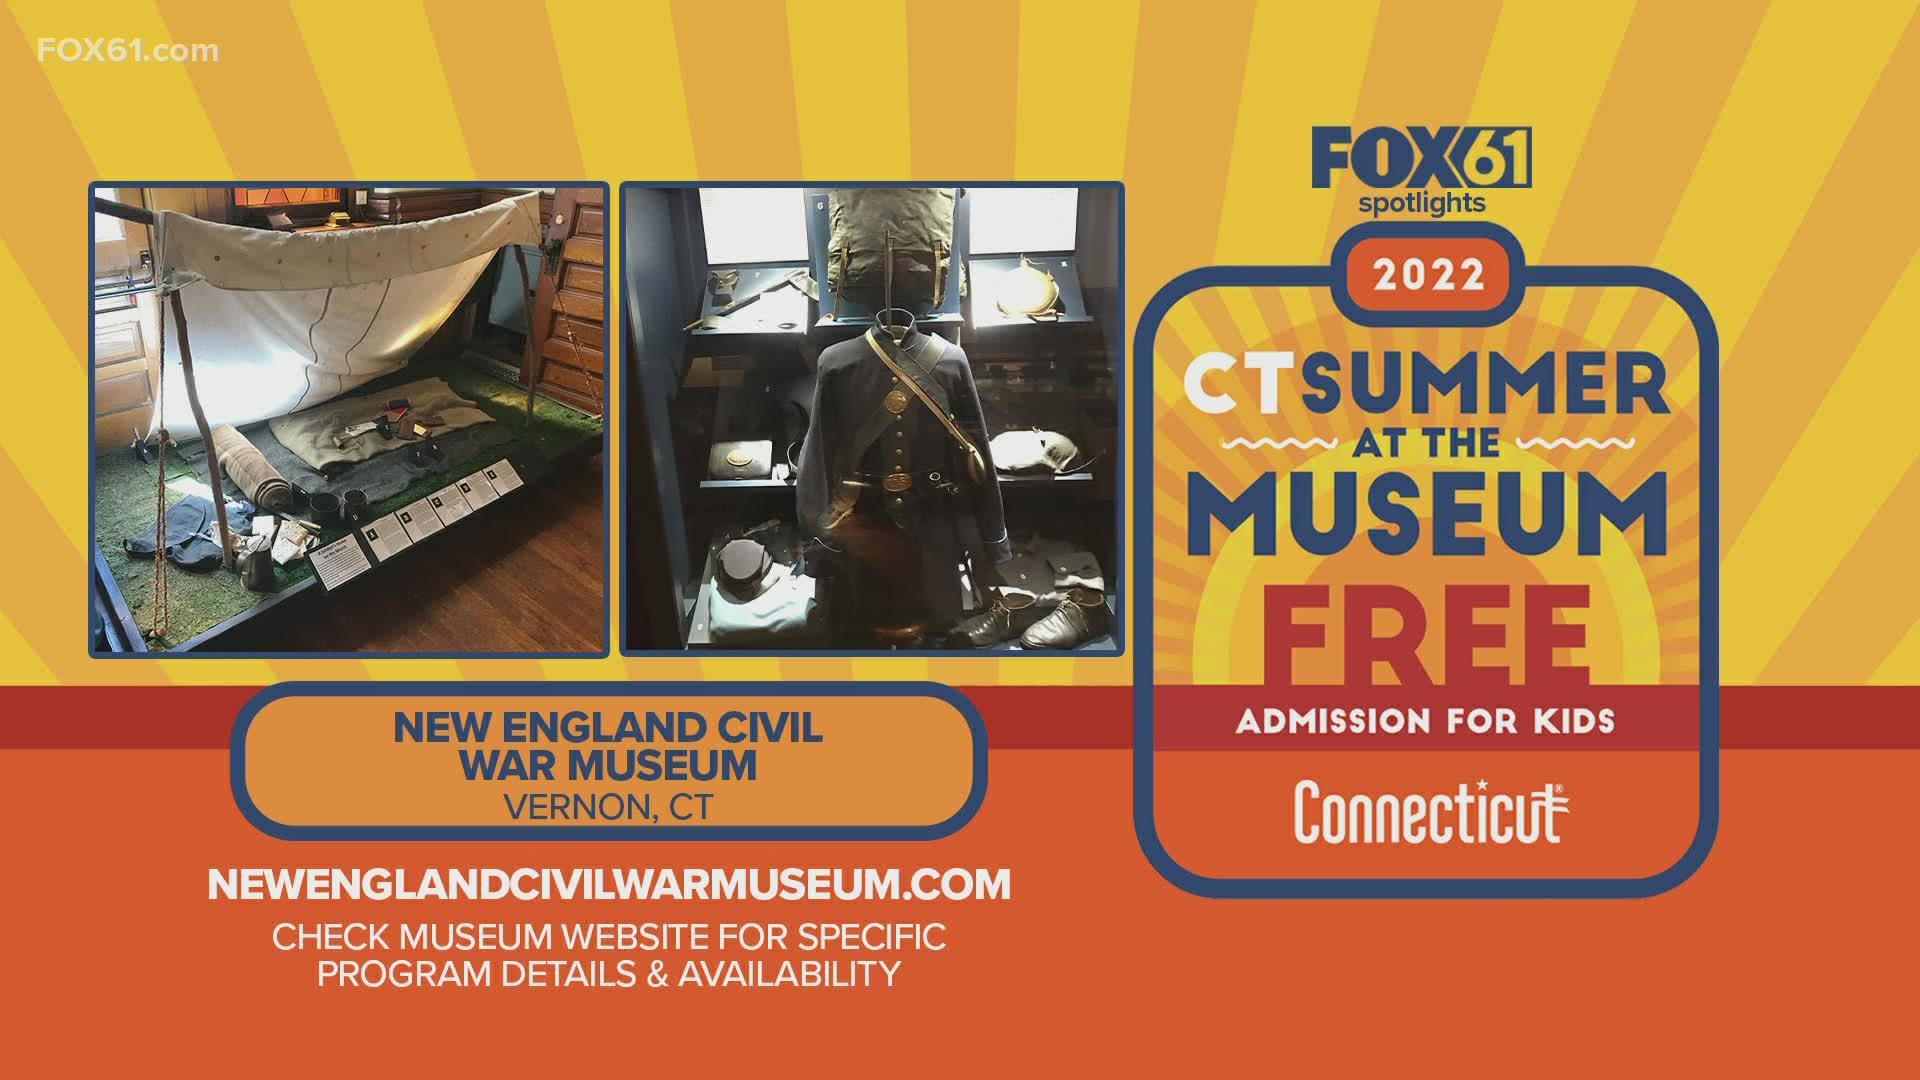 Kids 18 and under can visit The New England Civil War Museum with an adult who is a resident of Connecticut. It runs through Sept. 5.